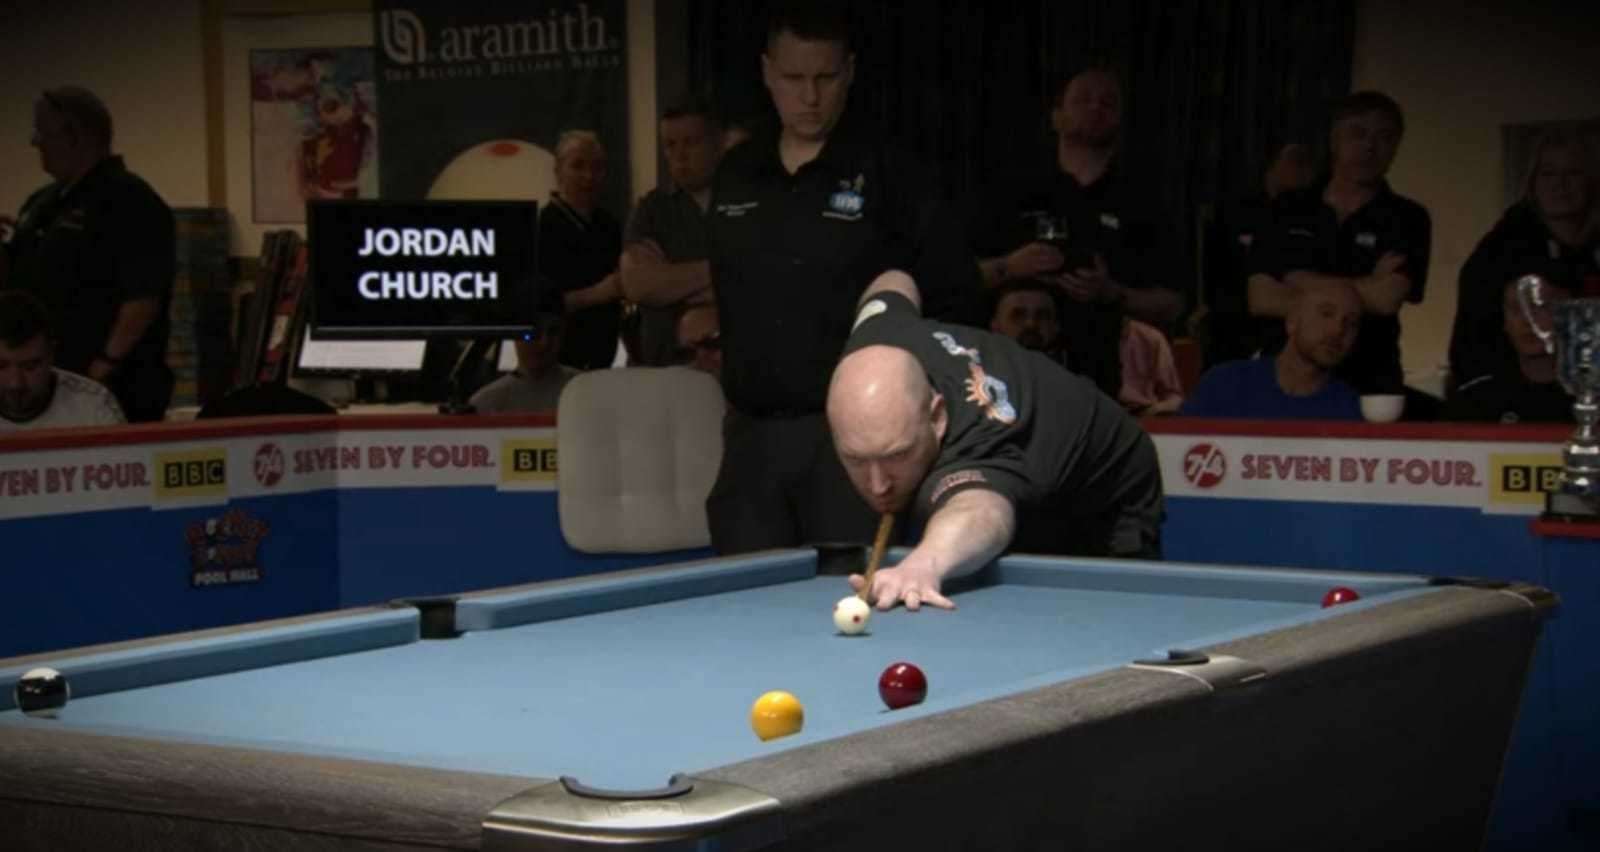 Medway pool player Jordan Church won the UK Open in March 2020